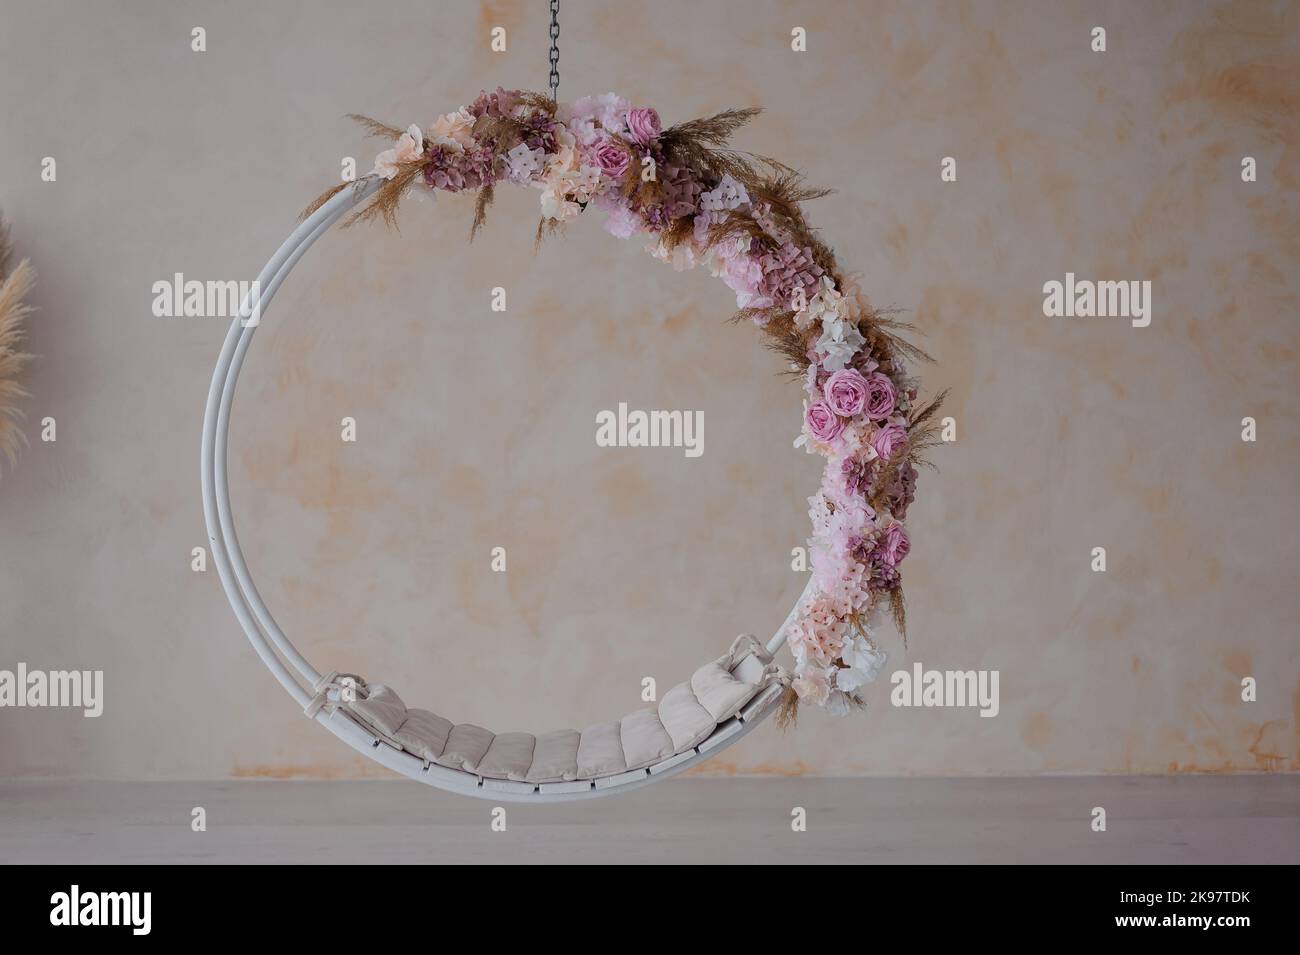 White swing on a chain, decorated with pink flowers. Vase in the background Stock Photo